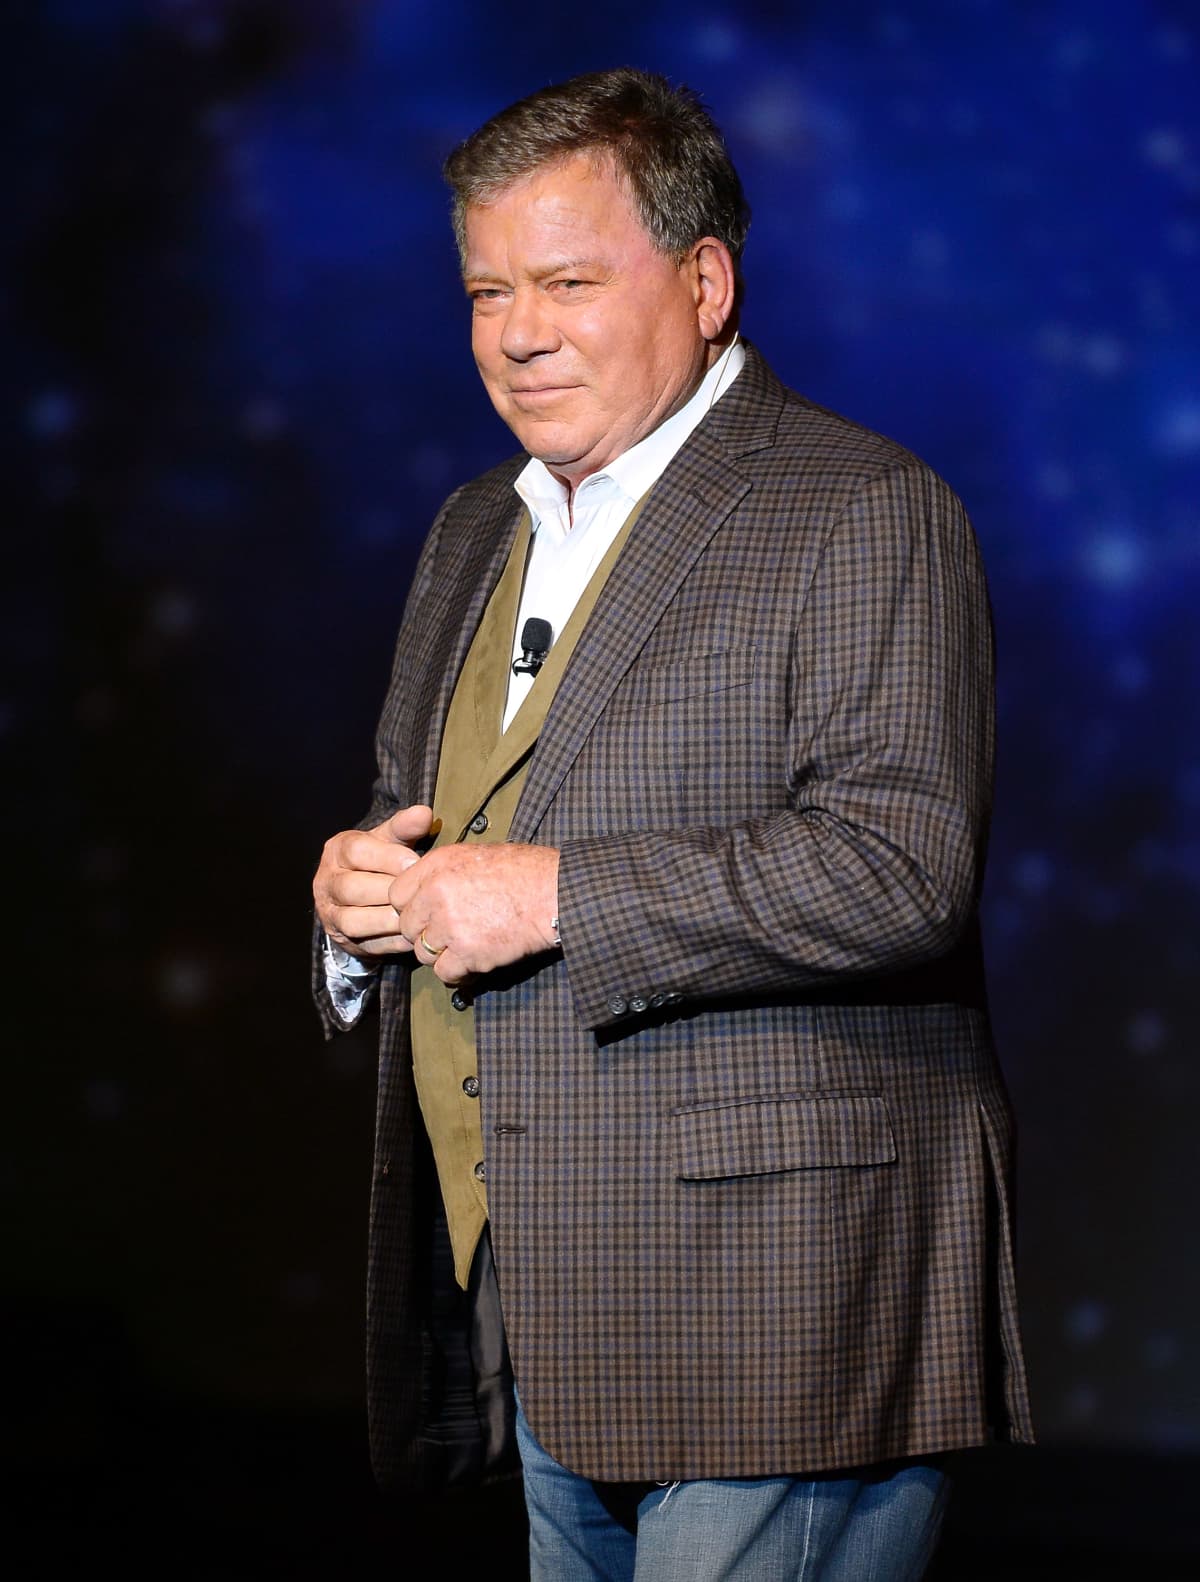 BEVERLY HILLS, CALIFORNIA - JUNE 02: William Shatner attends the 18th Annual Brandon Tartikoff Legacy Awards at Beverly Wilshire, A Four Seasons Hotel on June 02, 2022 in Beverly Hills, California. (Photo by David Livingston/Getty Images)